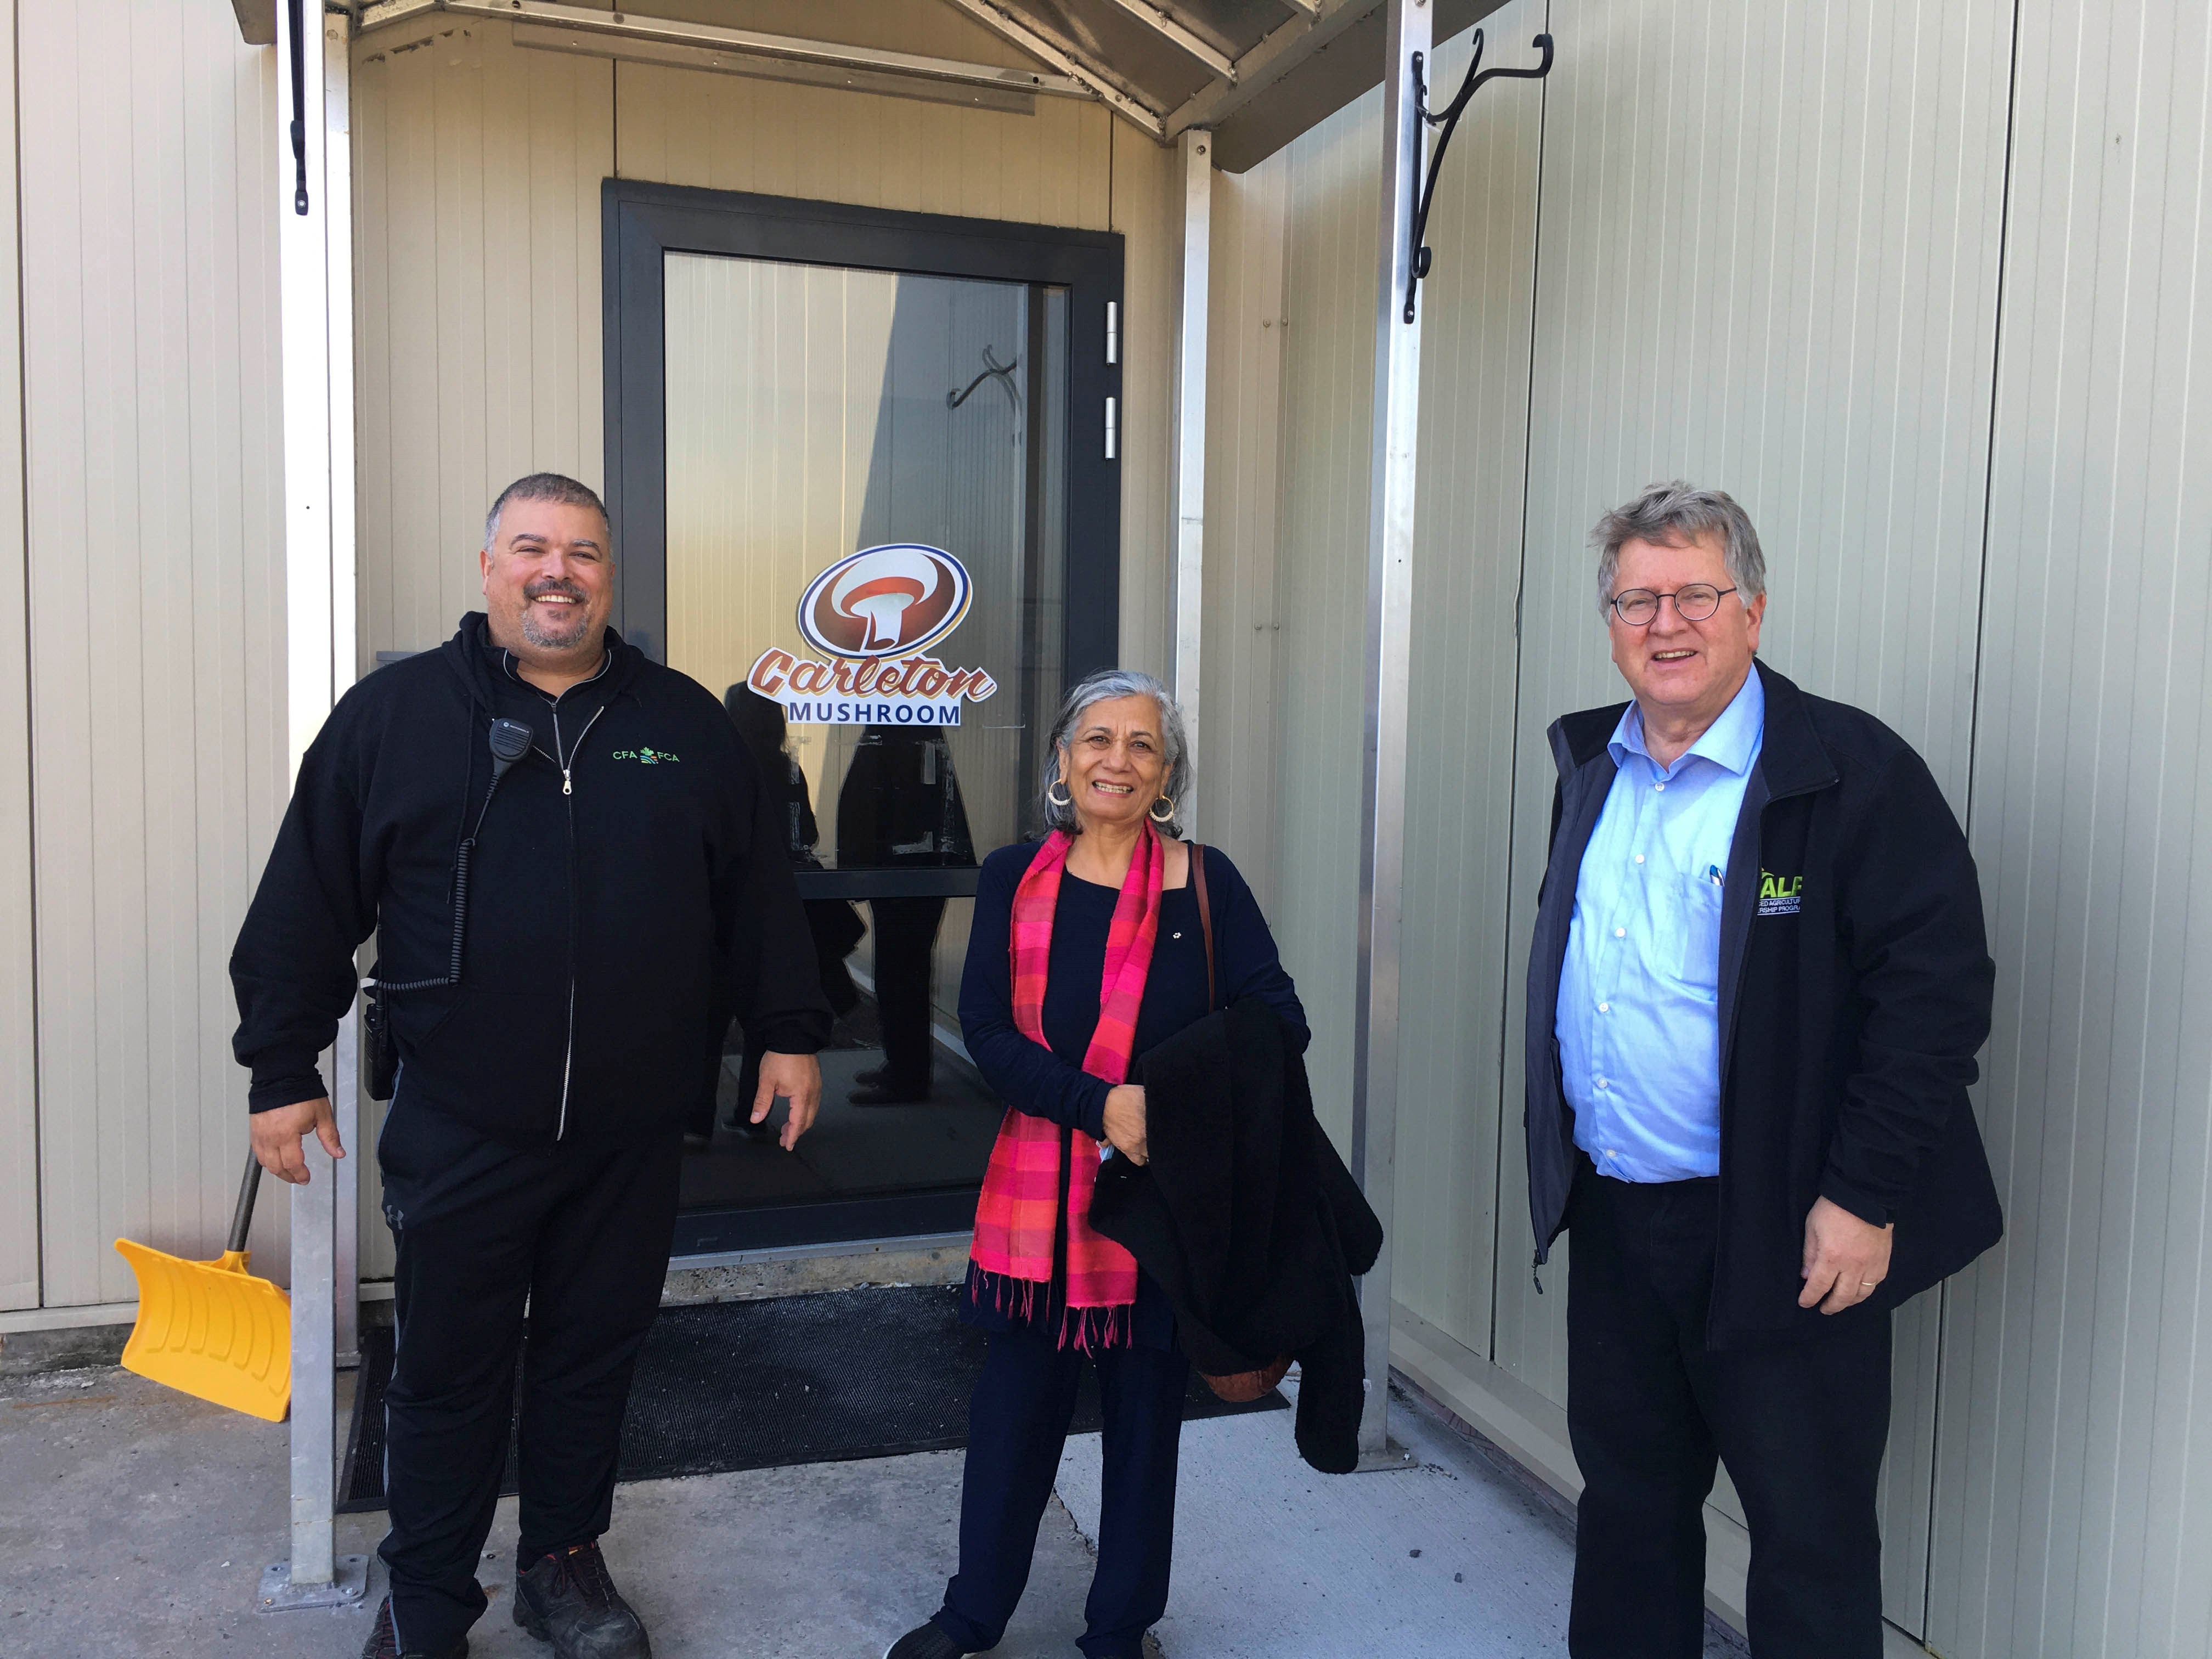 Friday, April 29, 2022 — Senator Ratna Omidvar (centre) and Senator Rob Black (right) visit Carleton Mushroom Farms in rural Ottawa, to learn more about the challenges and opportunities facing Canada’s mushroom growers.